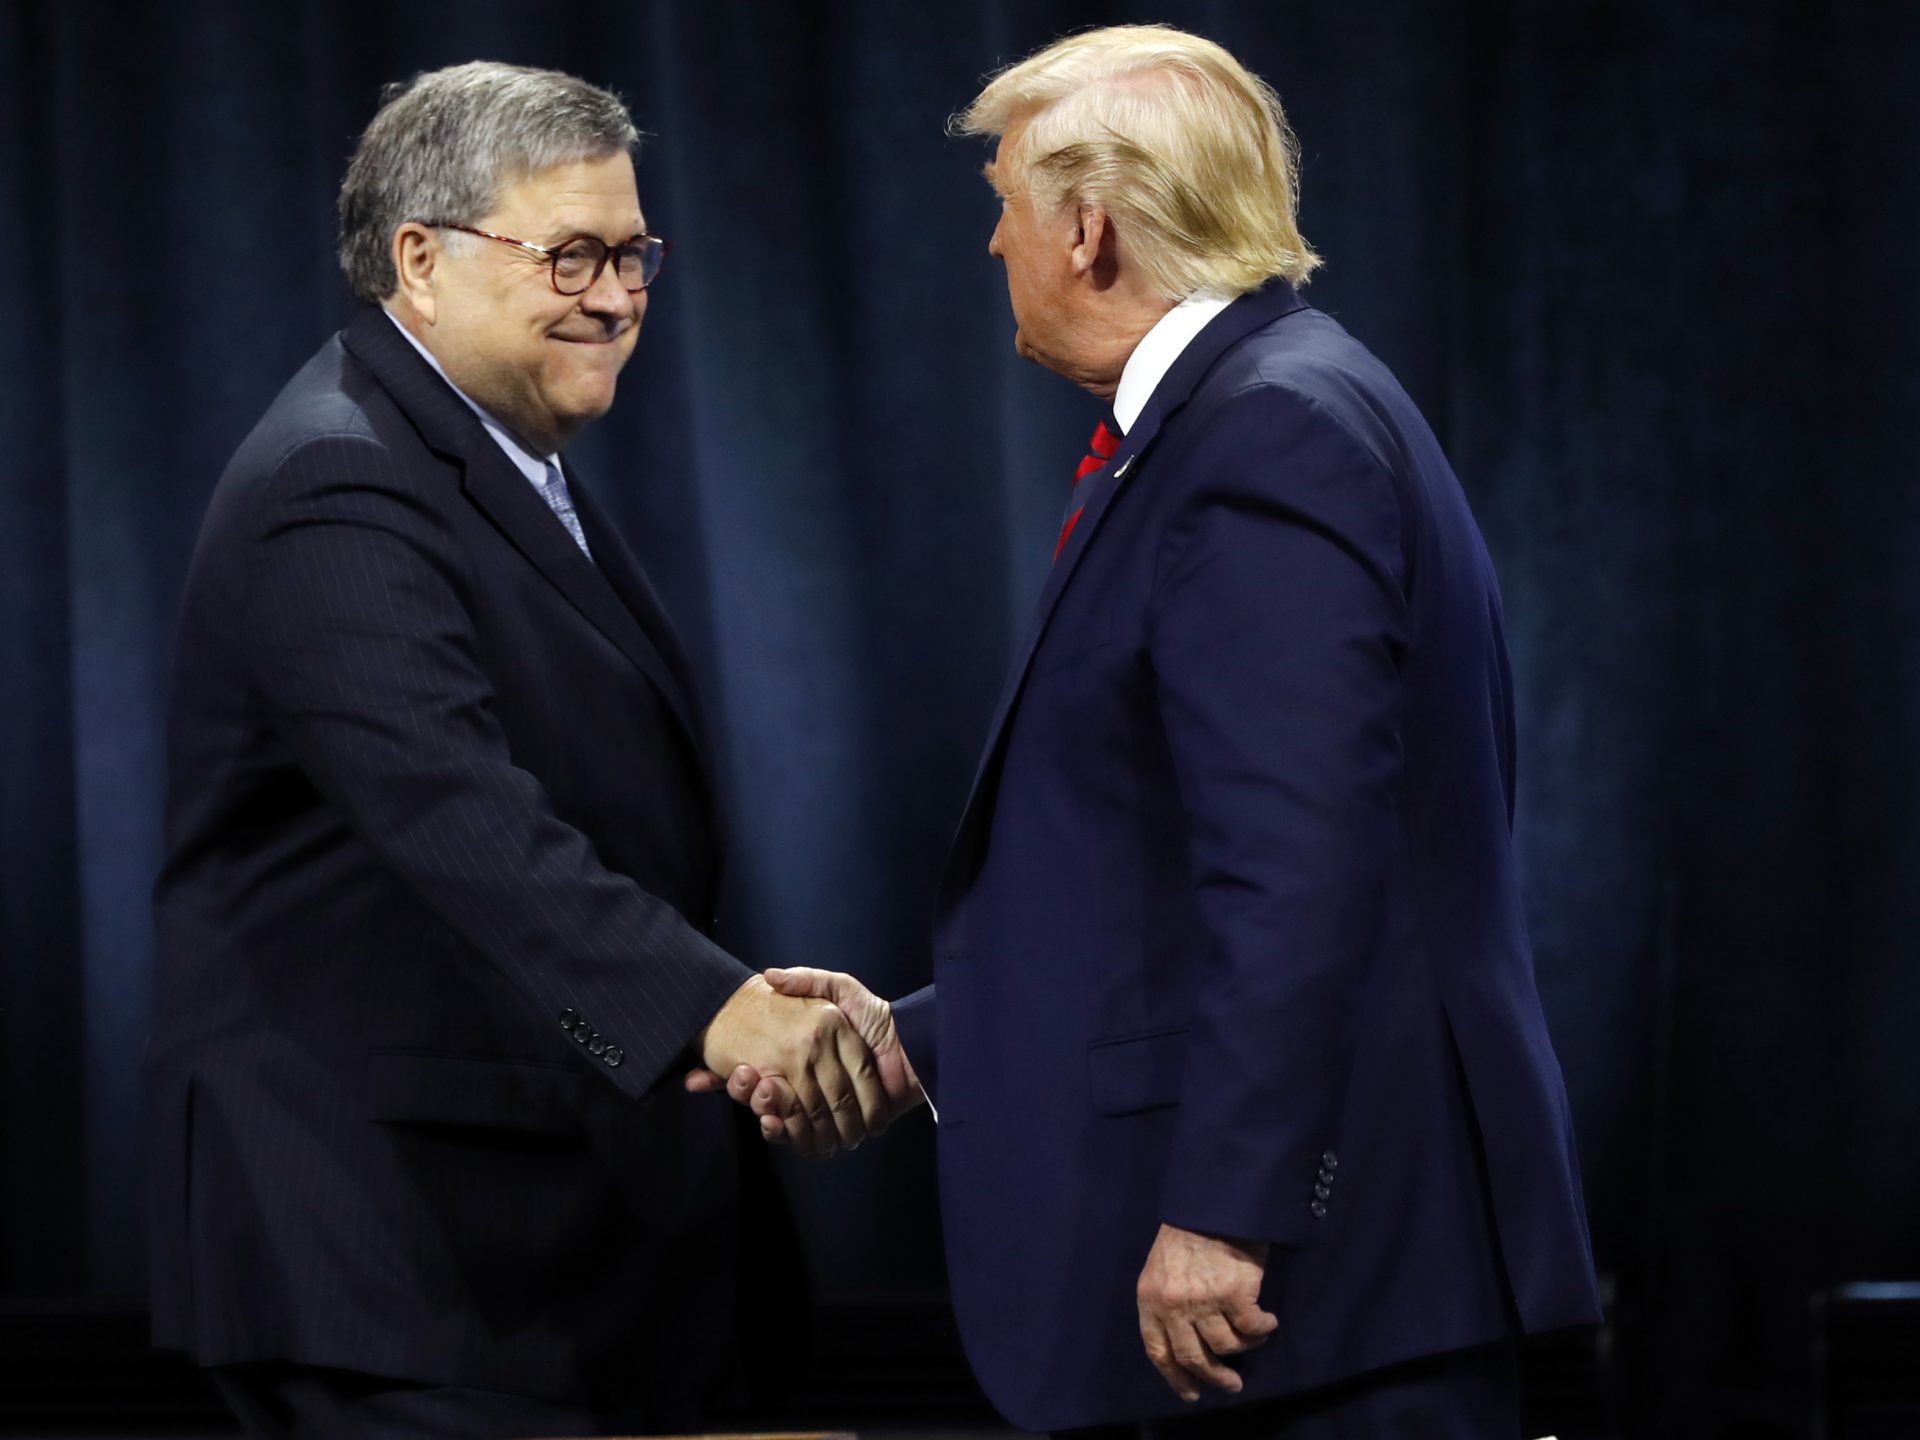 President Donald Trump greeted Attorney General William Barr before Trump signed an executive order creating a commission to study law enforcement and justice on Oct. 28, 2019.